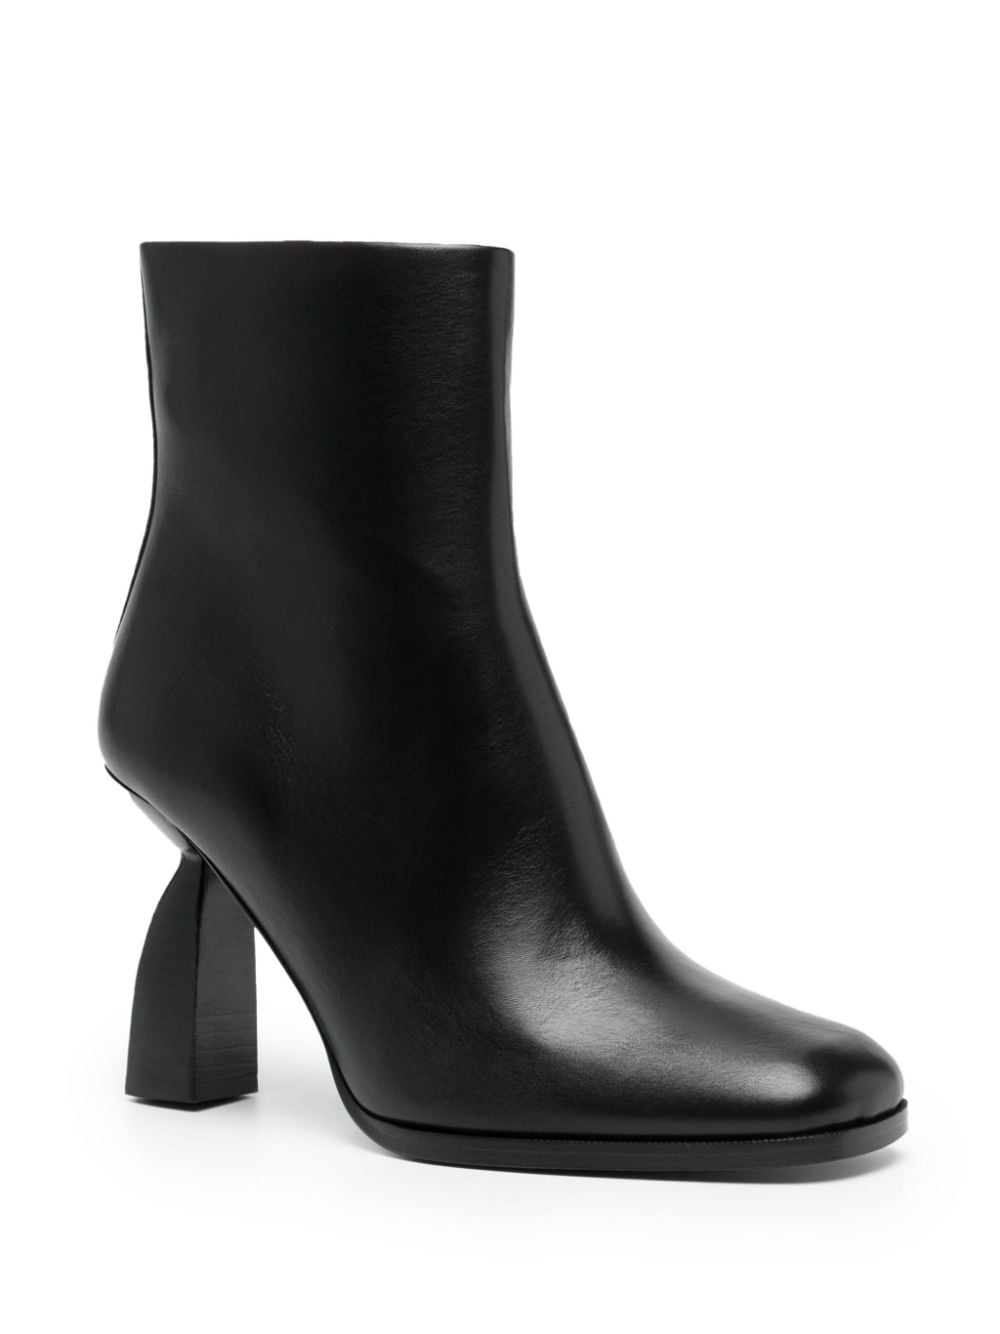 Image 2 of Nodaleto sculpted-heel ankle boots